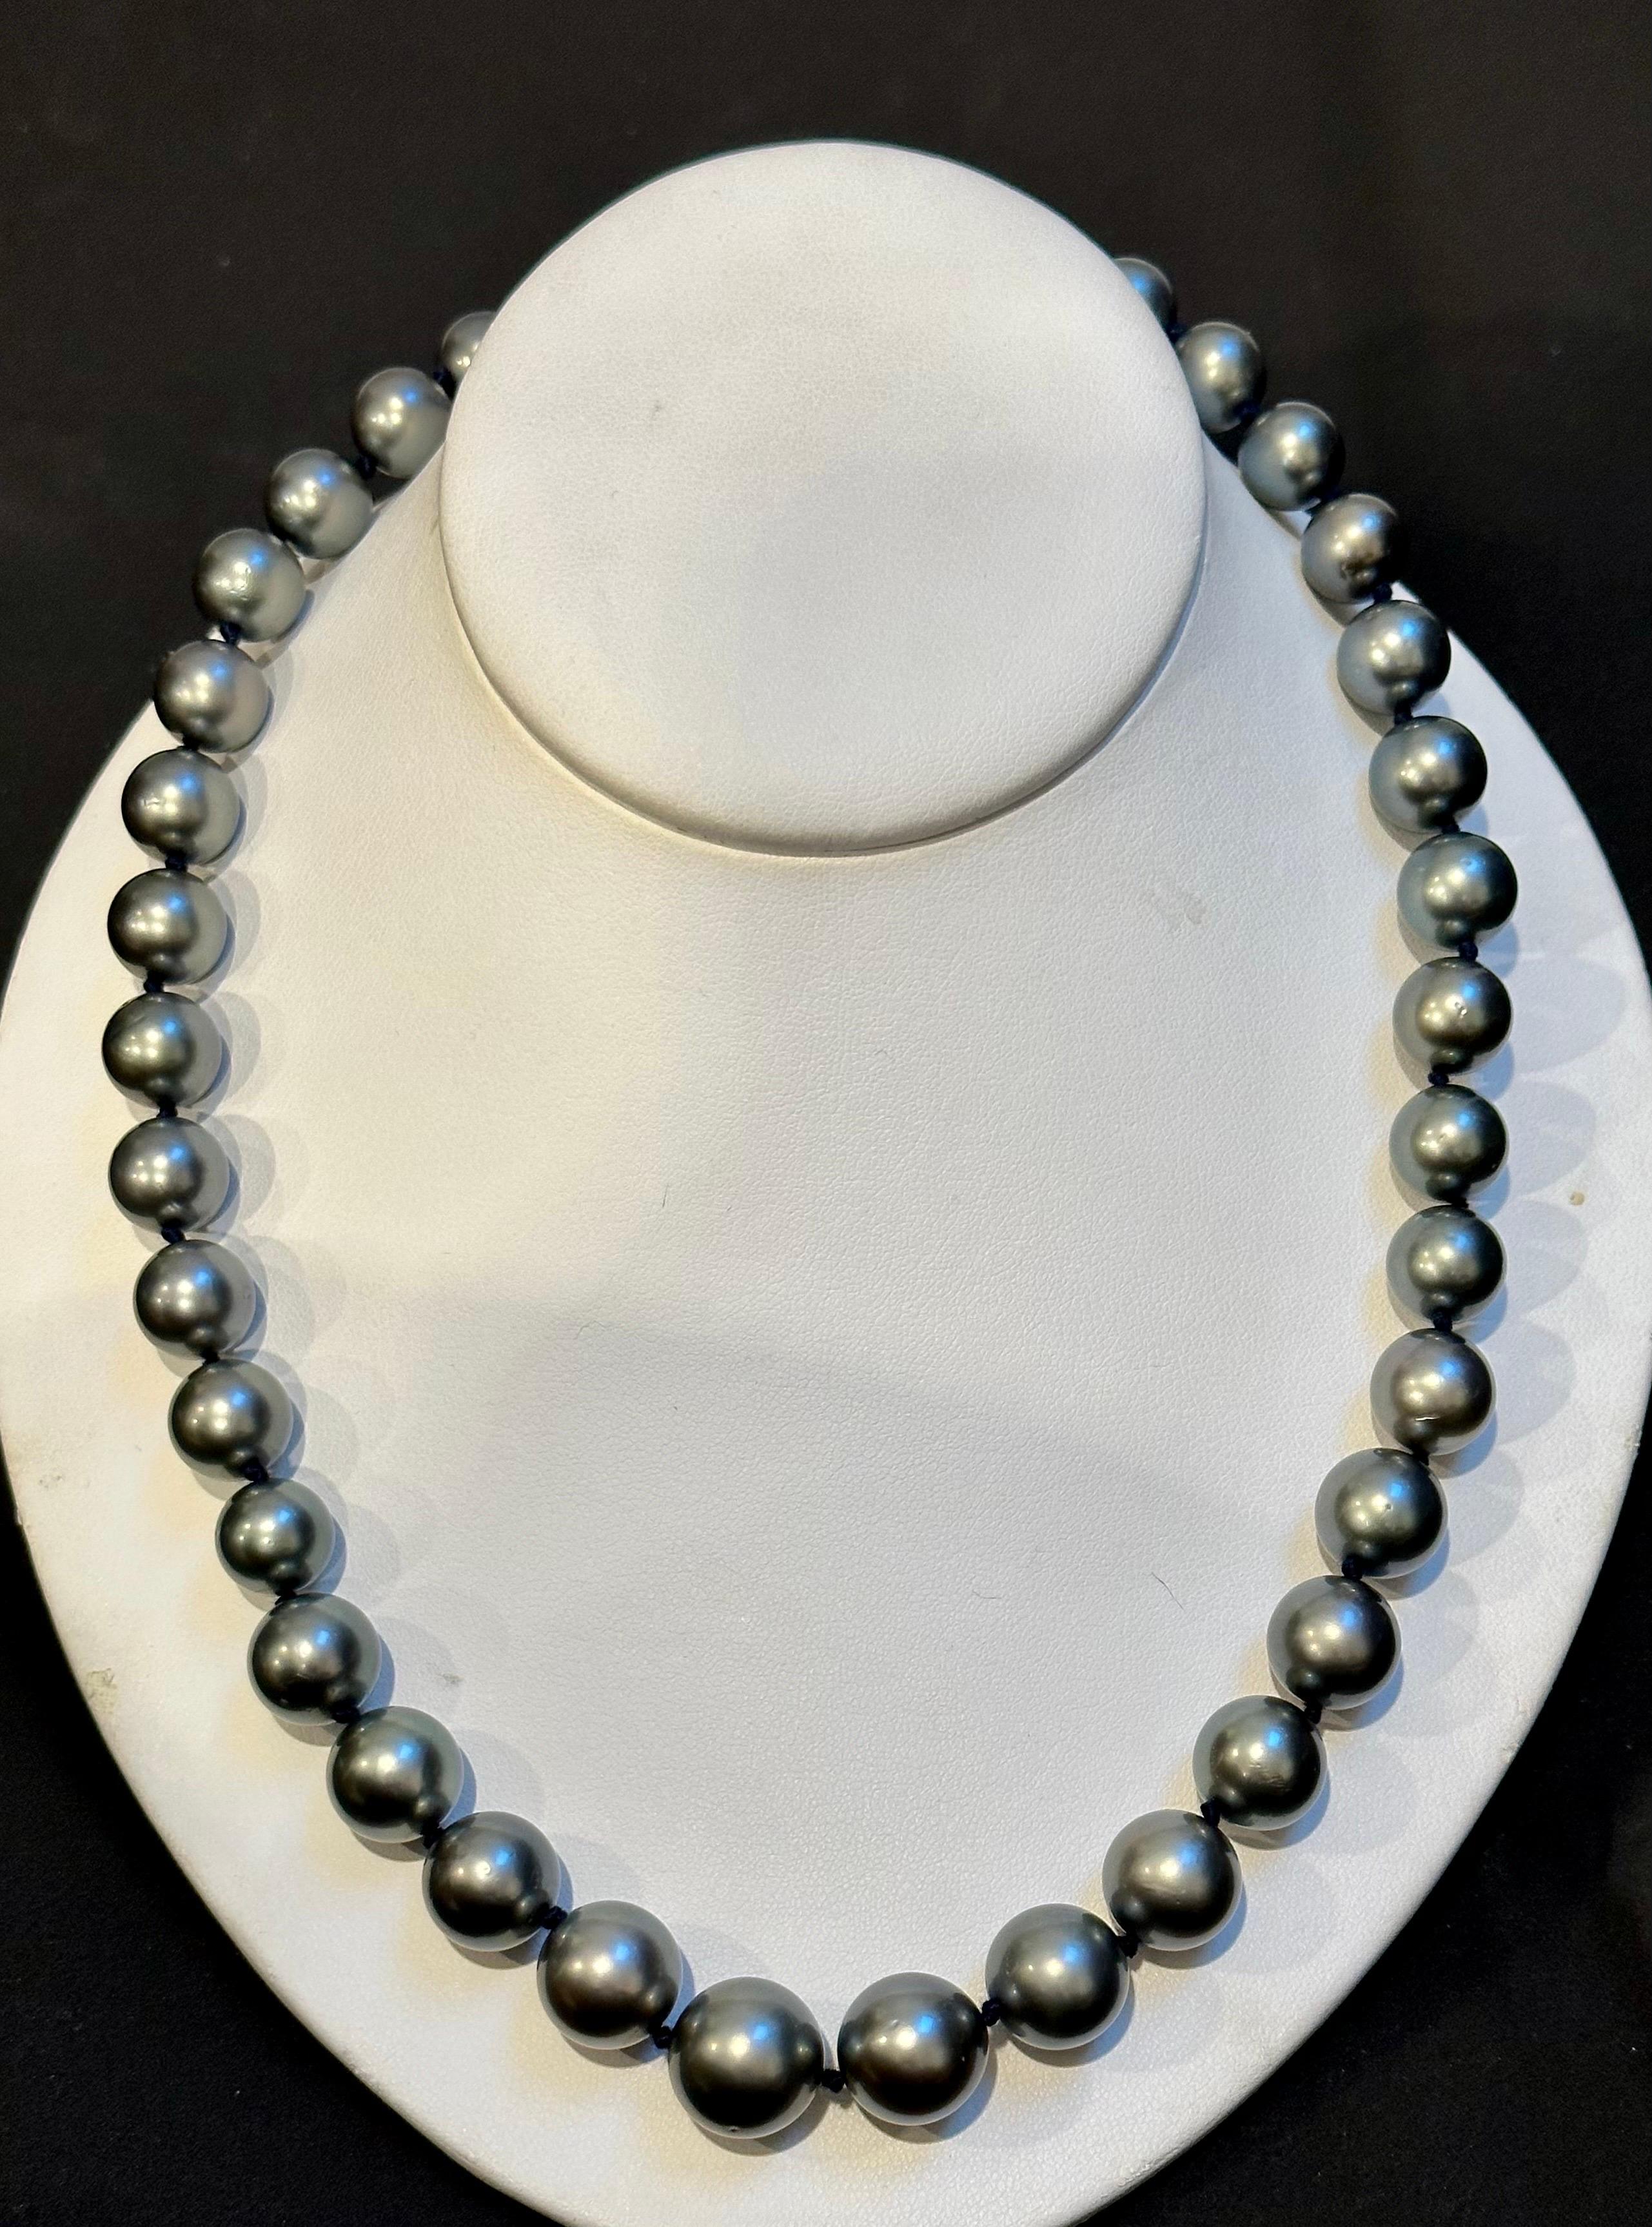 If you're in the market for a truly exceptional piece of jewelry, look no further than this 11 to 15 MM Tahitian Black Graduating Pearls Strand Necklace. This estate piece is exclusive and boasts very, very fine quality, making it a true treasure to